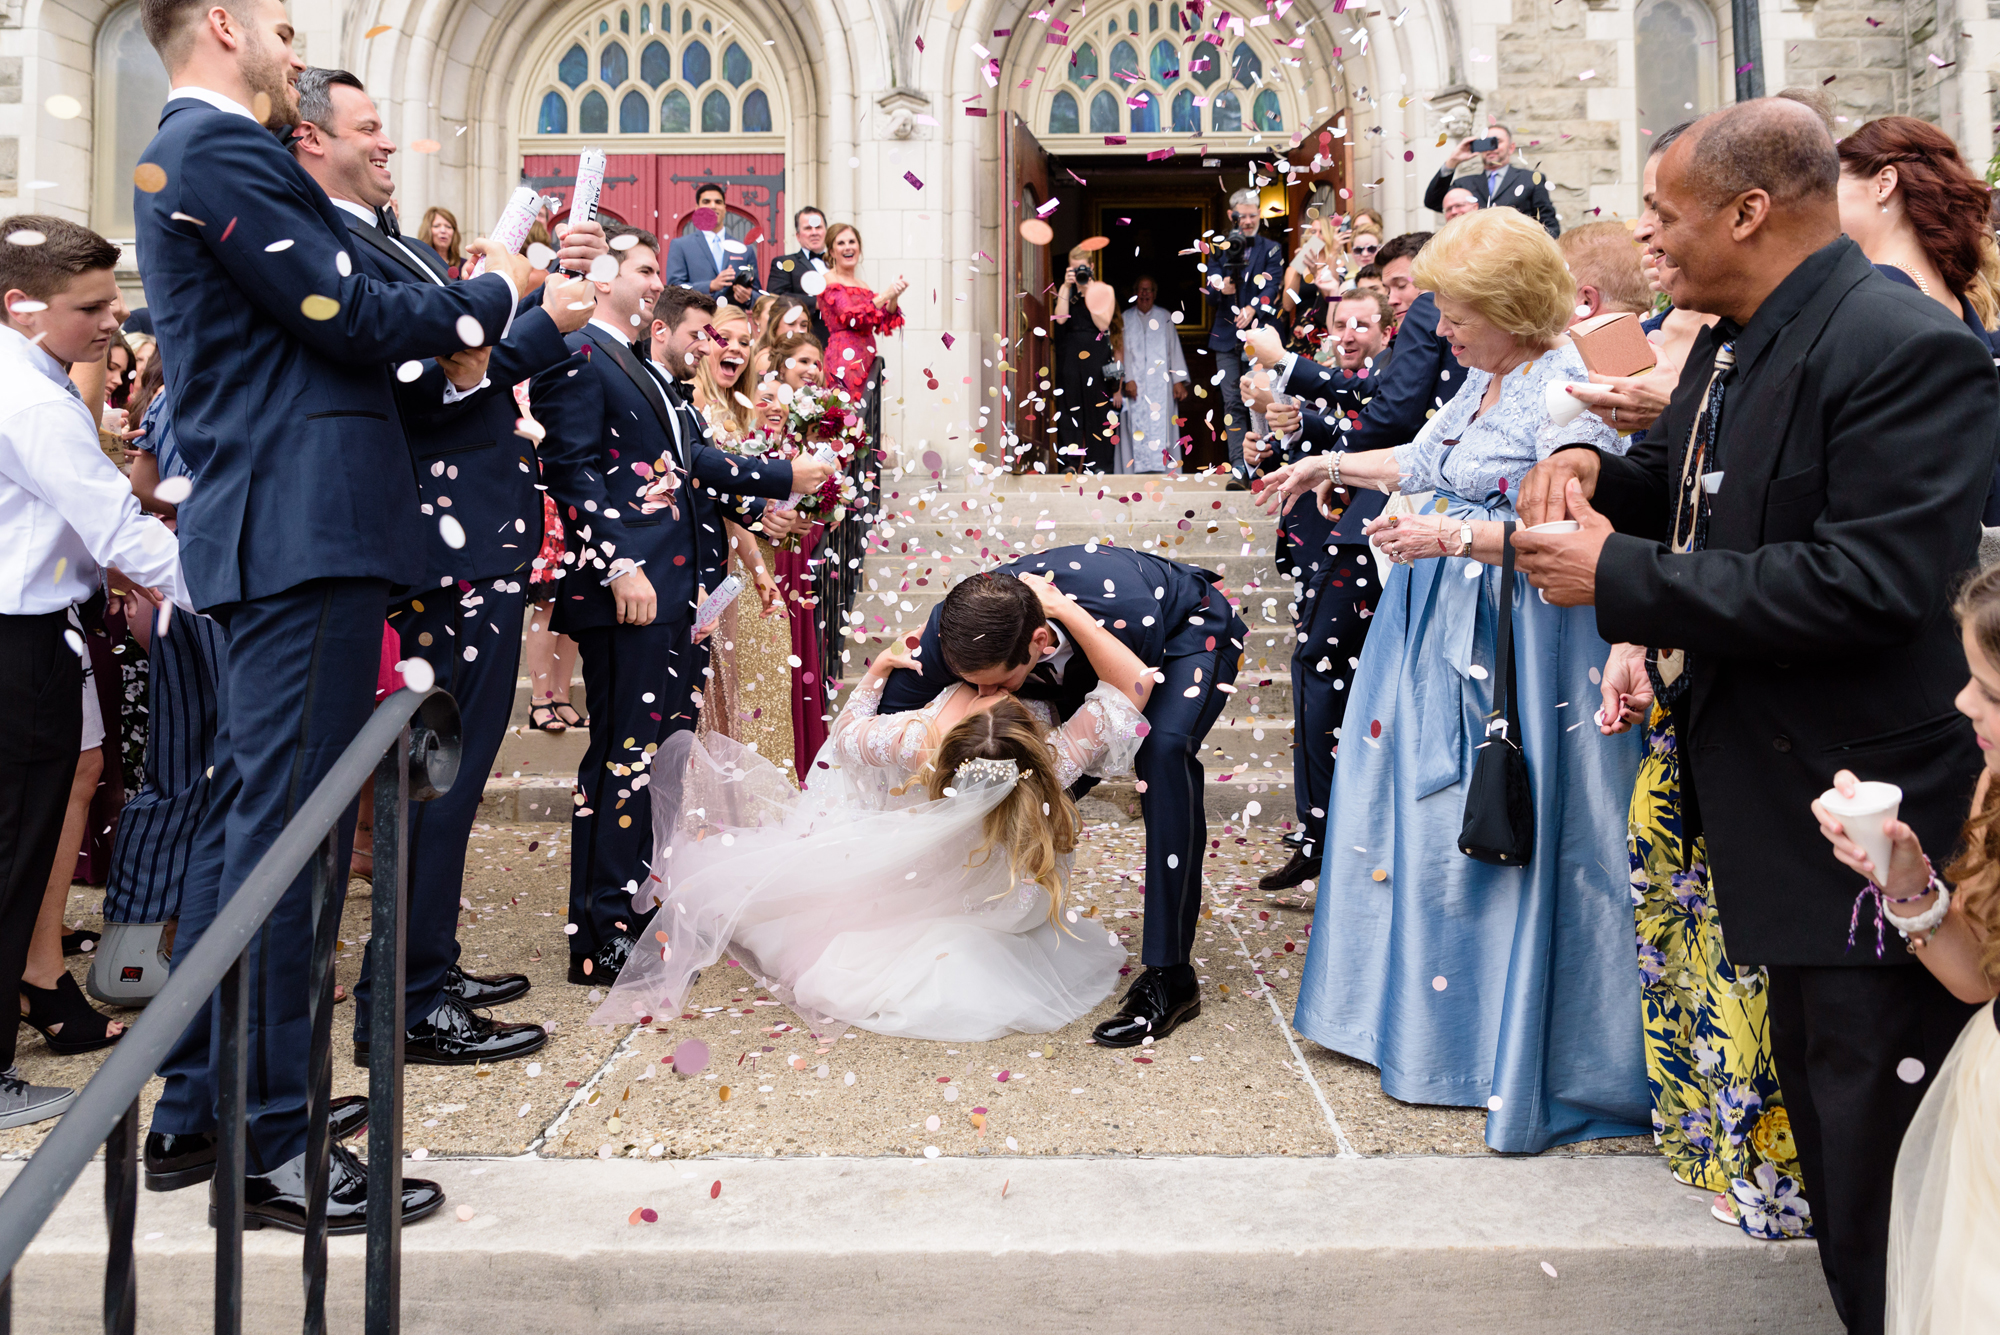 Bride & Groom leaving their wedding ceremony with a confetti exit at St. Paul’s Memorial United Methodist Church